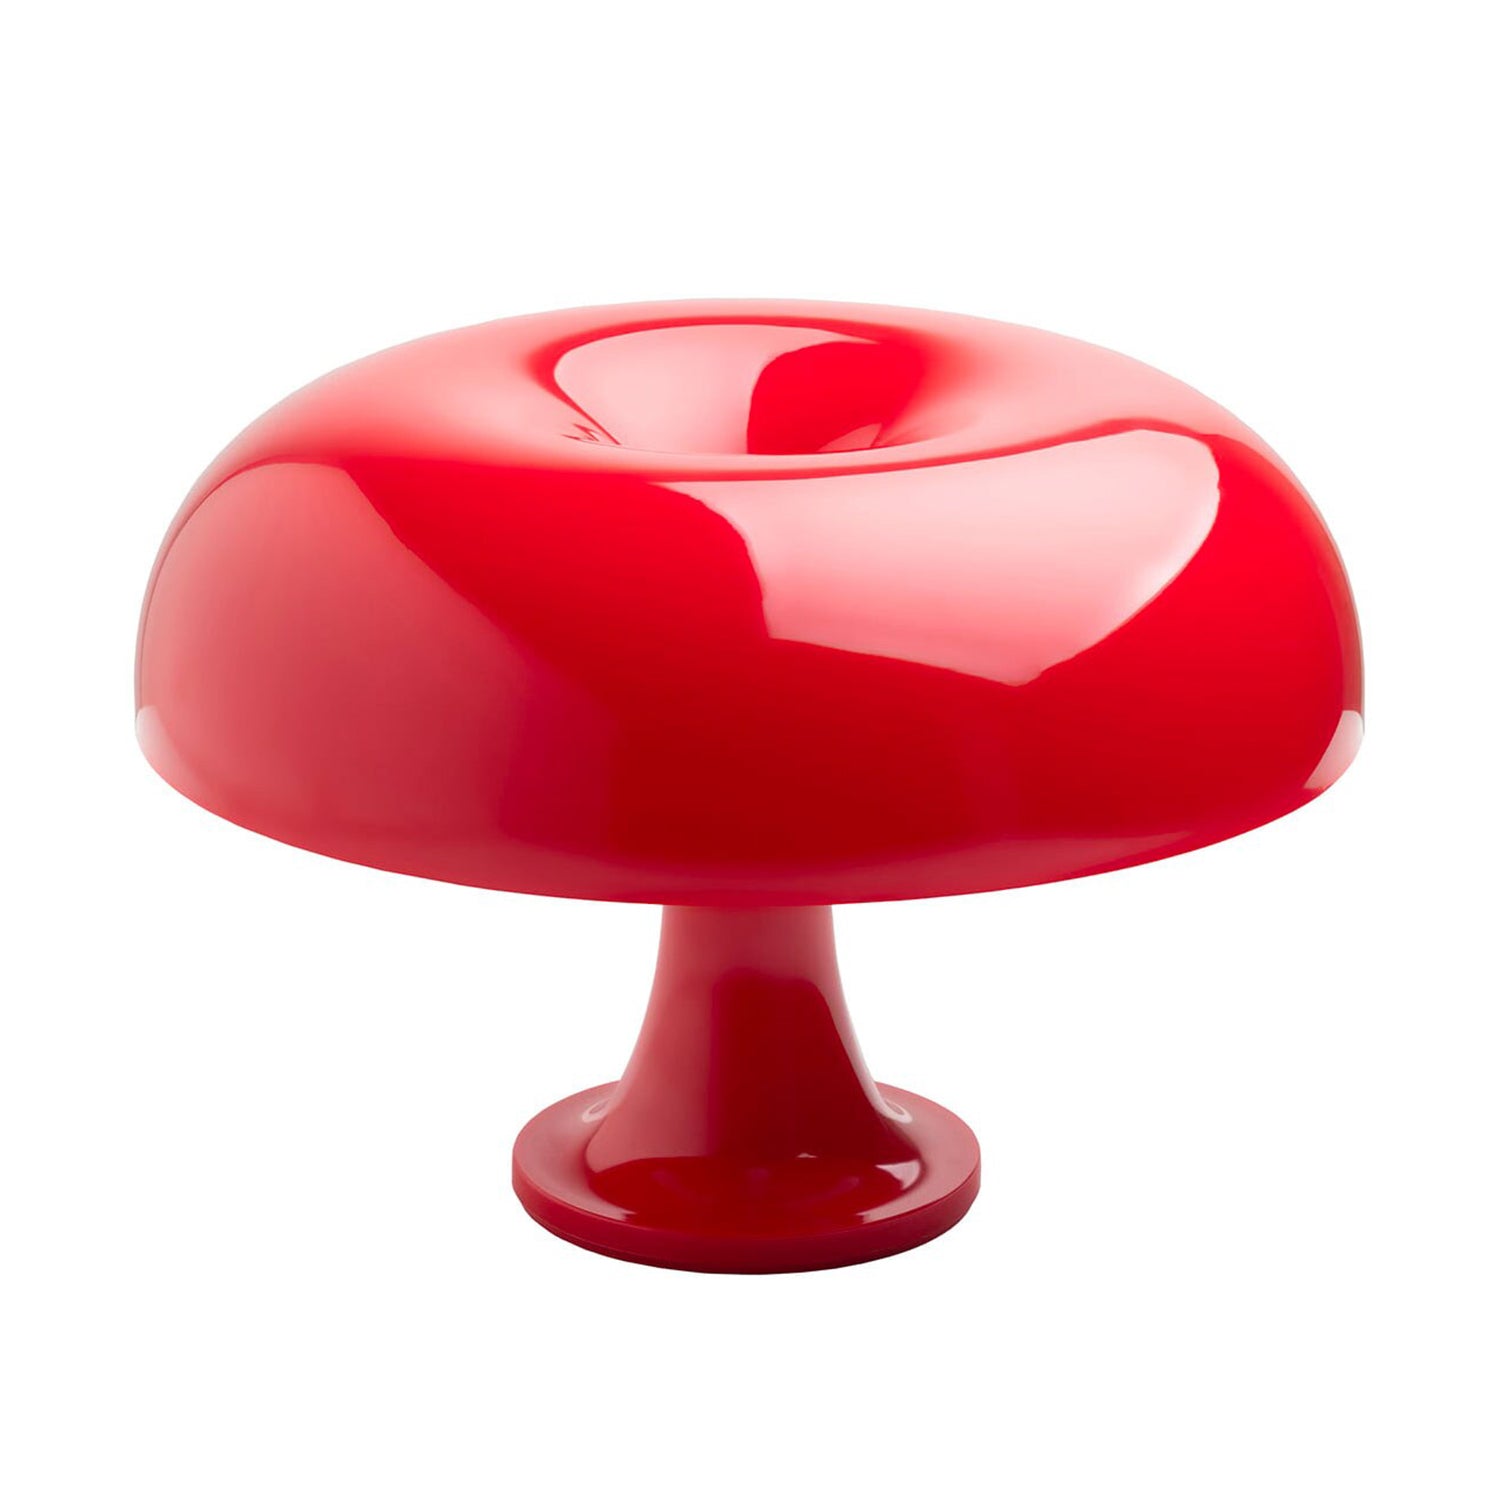 Artemide Nessino Table Lamp in Red